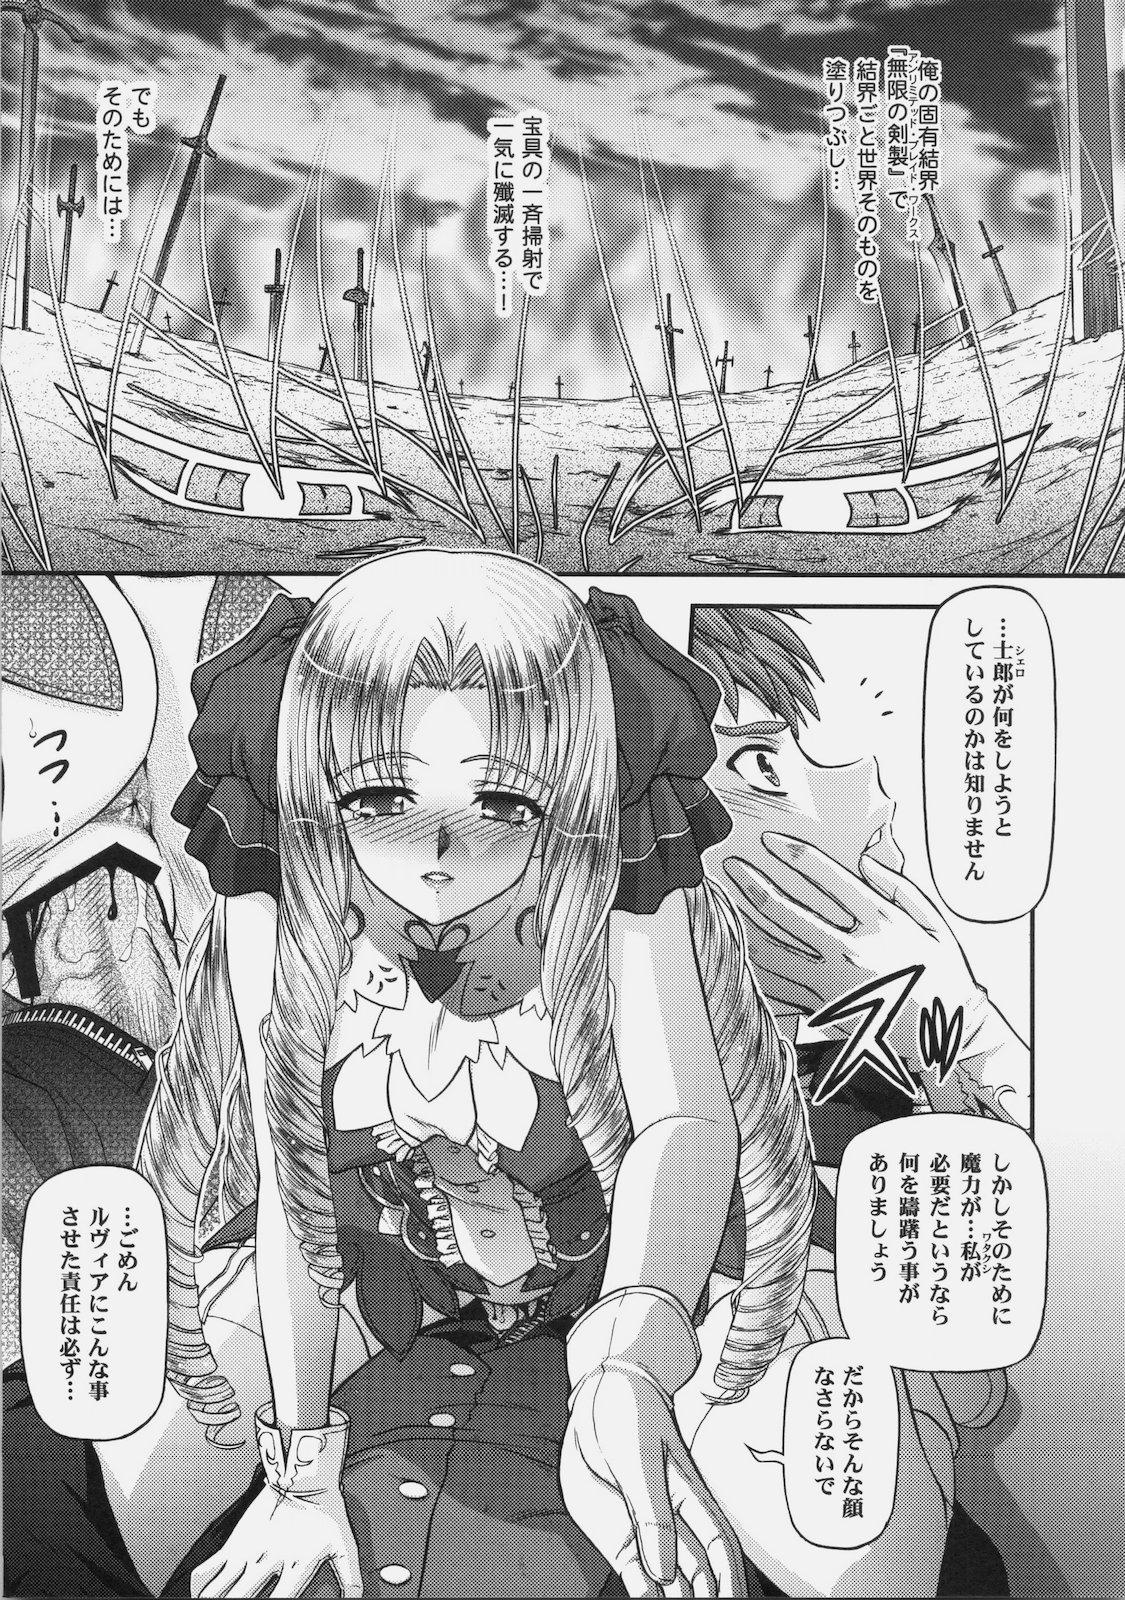 Sis BLUE BLOOD'S vol.26 - Fate hollow ataraxia Fuck - Page 9